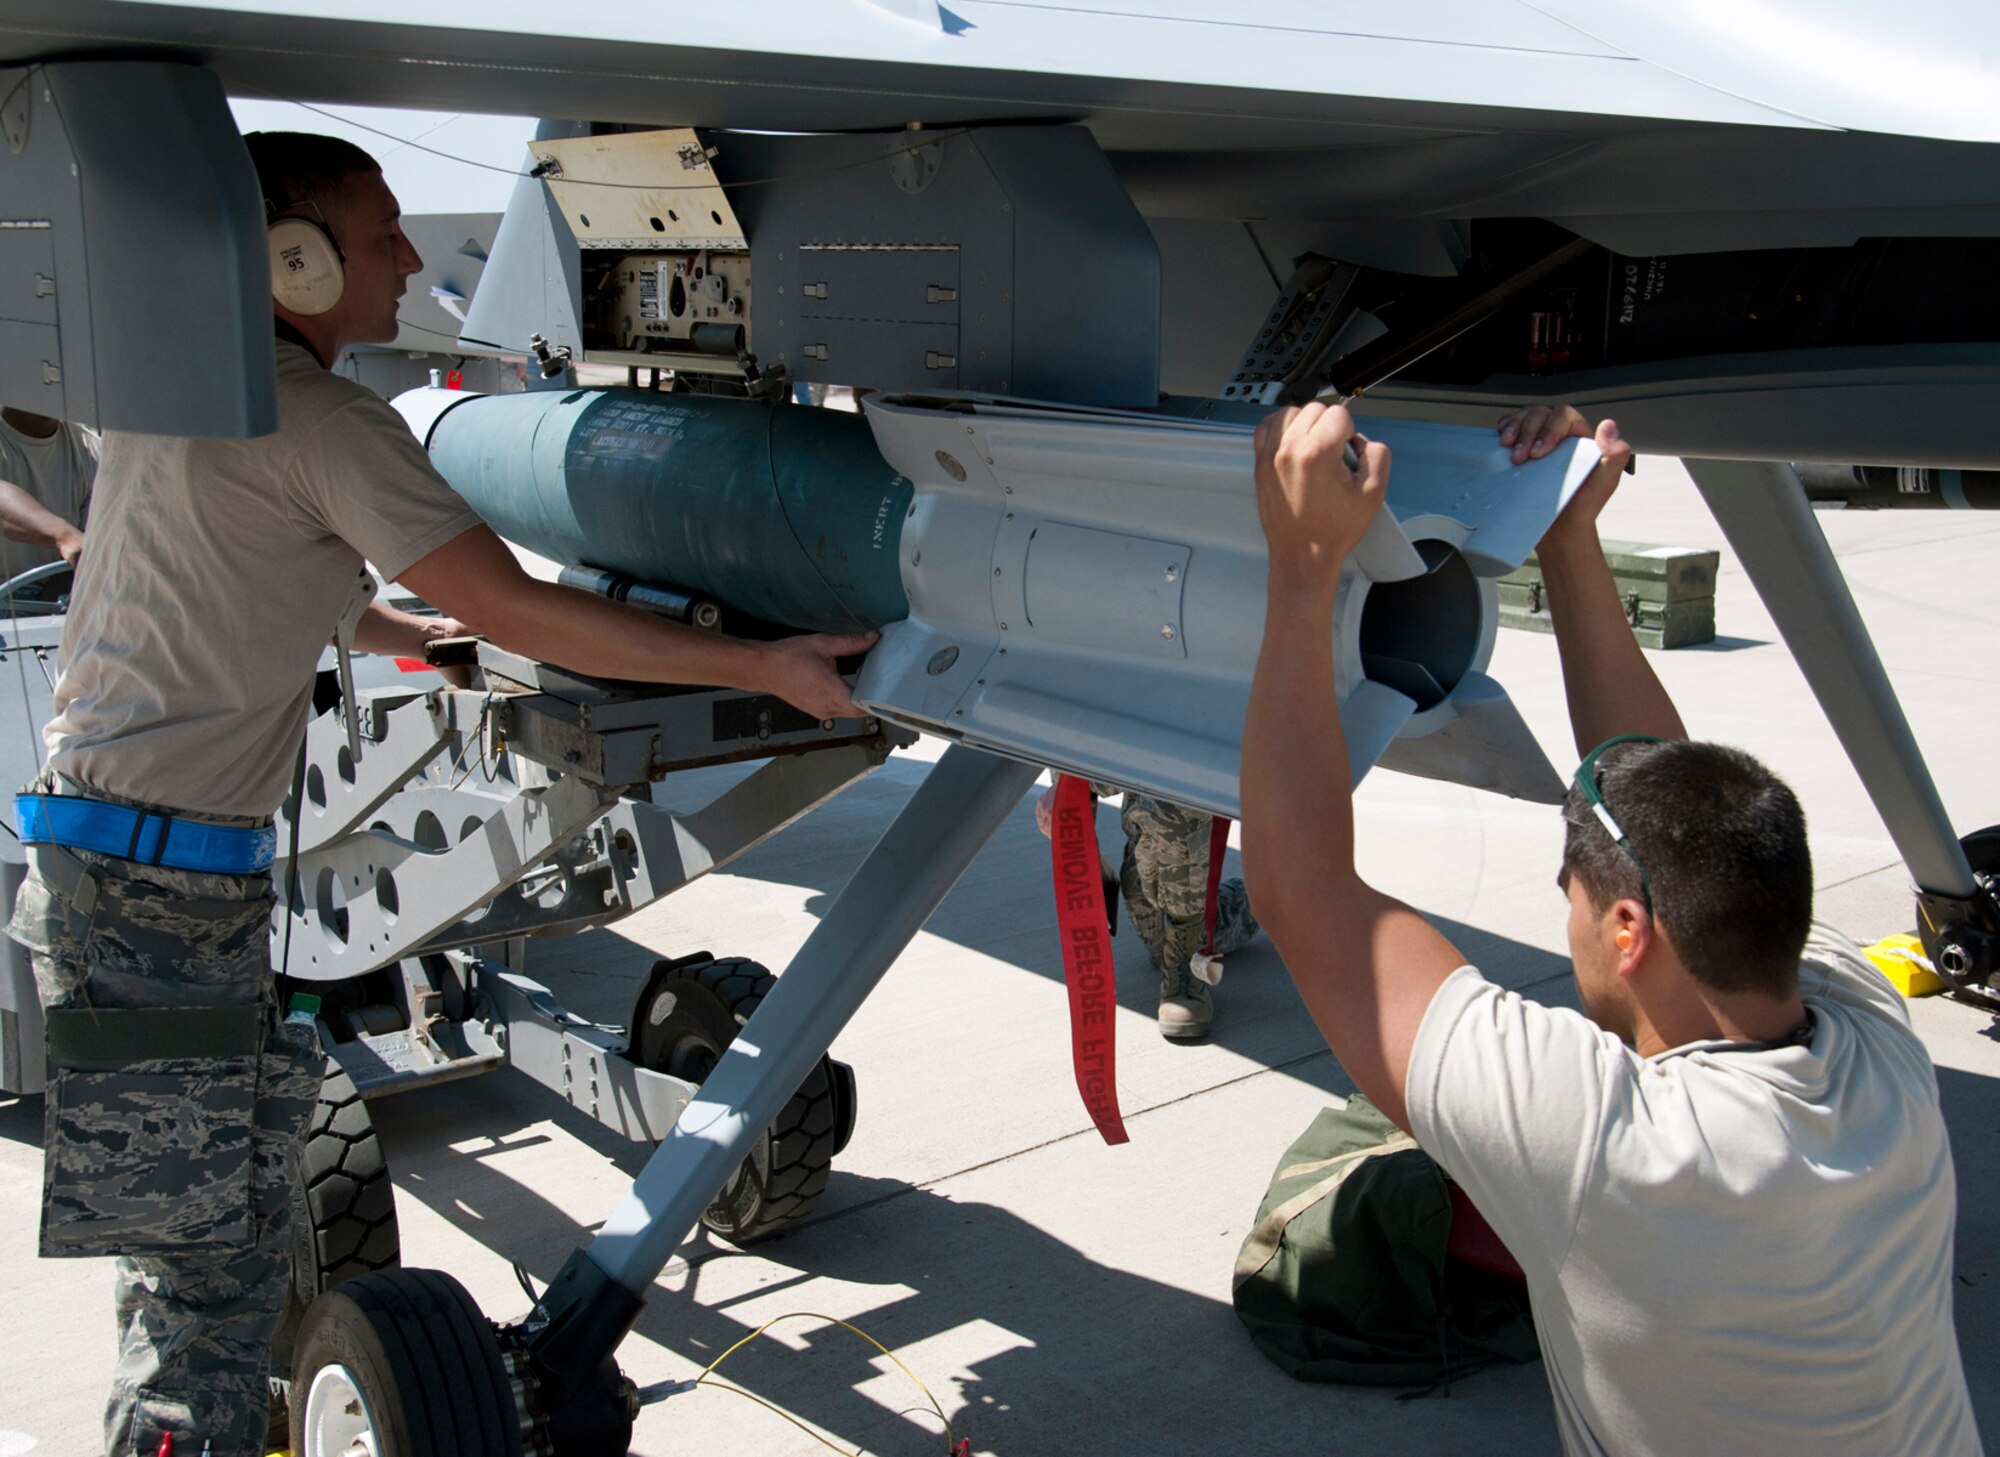 HOLLOMAN AIR FORCE BASE, N.M. -- A Staff Sergeant and Senior Airman from the 49th Maintenance Group load a GBU-12 Laser-Guided Bomb onto an aircraft July 8, 2011, during a quarterly load crew competition. For competitions, points are awarded during the actual weapons loading, a tool kit inspection and a uniform inspection. This particular load crew competition was Holloman’s first to feature a German Air Force load crew. (U.S. Air Force photo by Airman 1st Class Siuta B. Ika/Released)